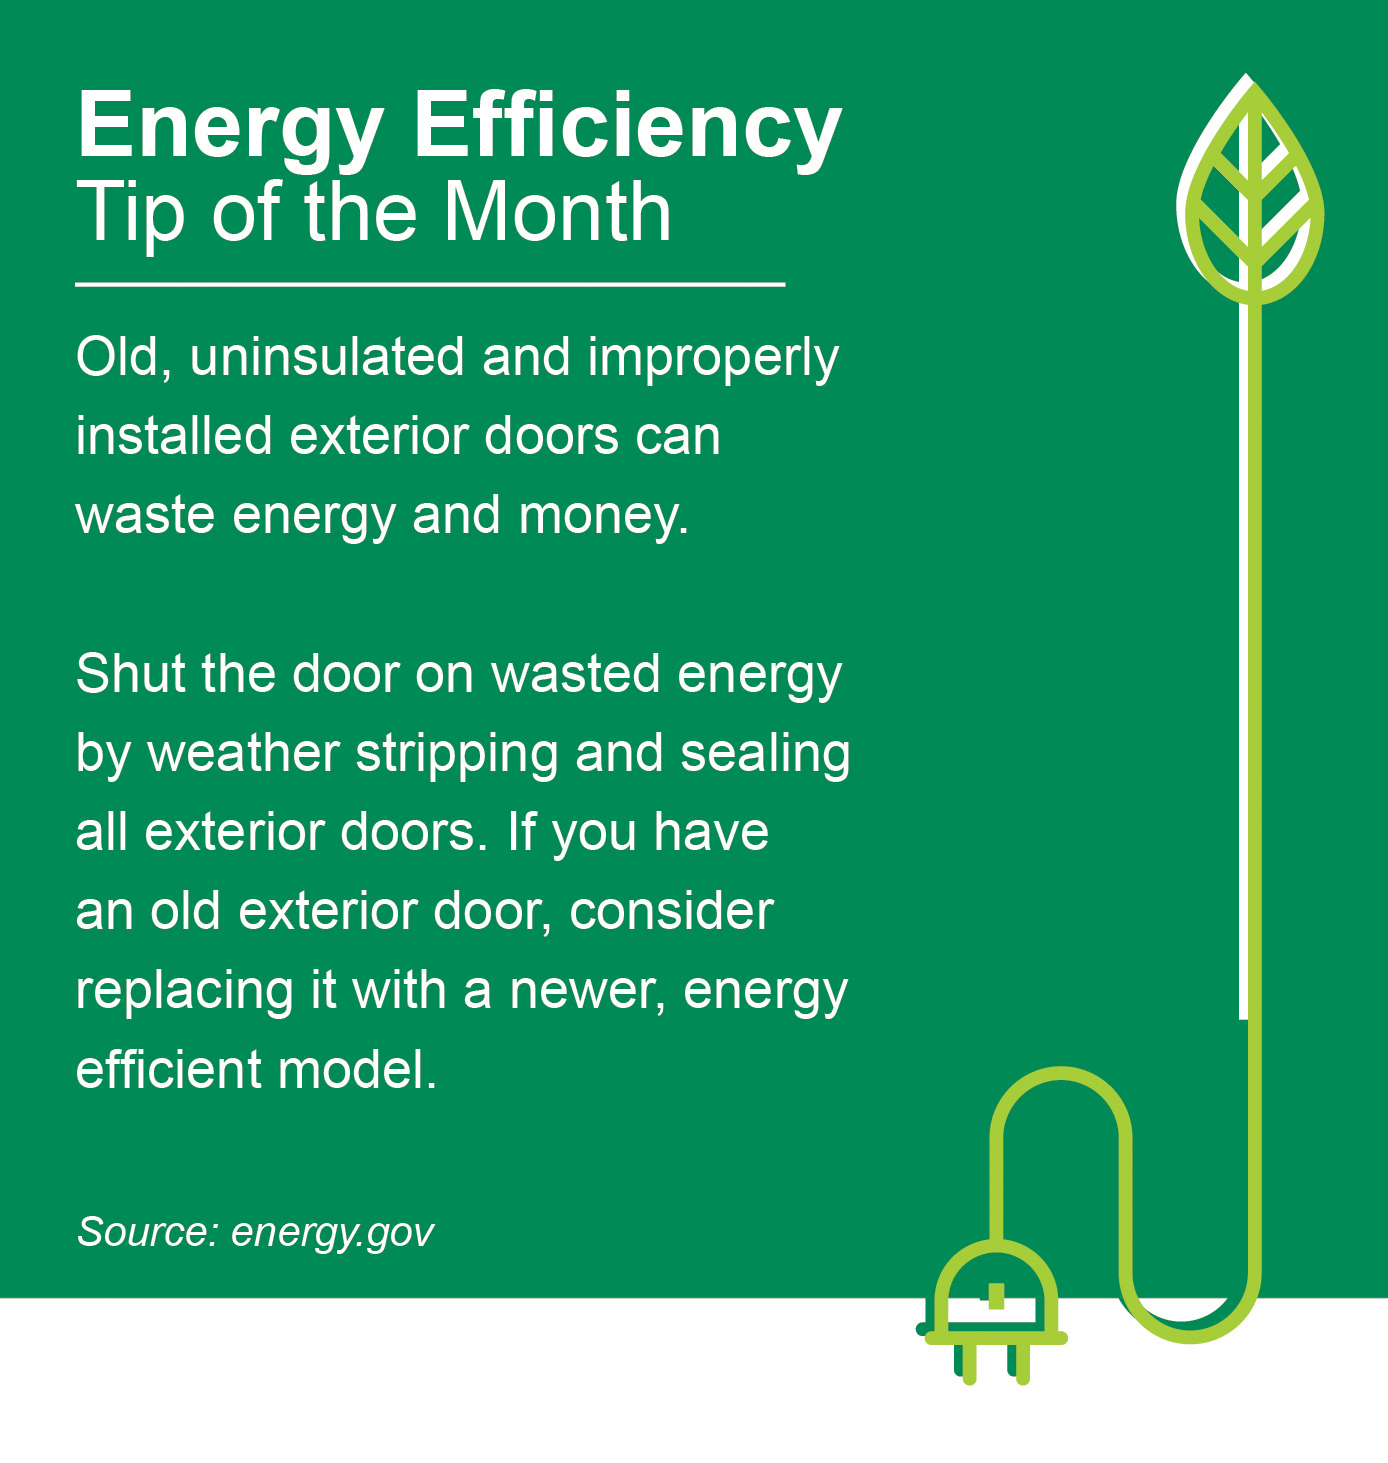 ENERGY EFFICIENCY TIP OF THE MONTH: Old, uninsulated and improperly installed exterior doors can waste energy and money. Shut the door on wasted energy by weather stripping and sealing all exterior doors. If you have an old exterior door, consider replacing it with a newer, energy efficient model.